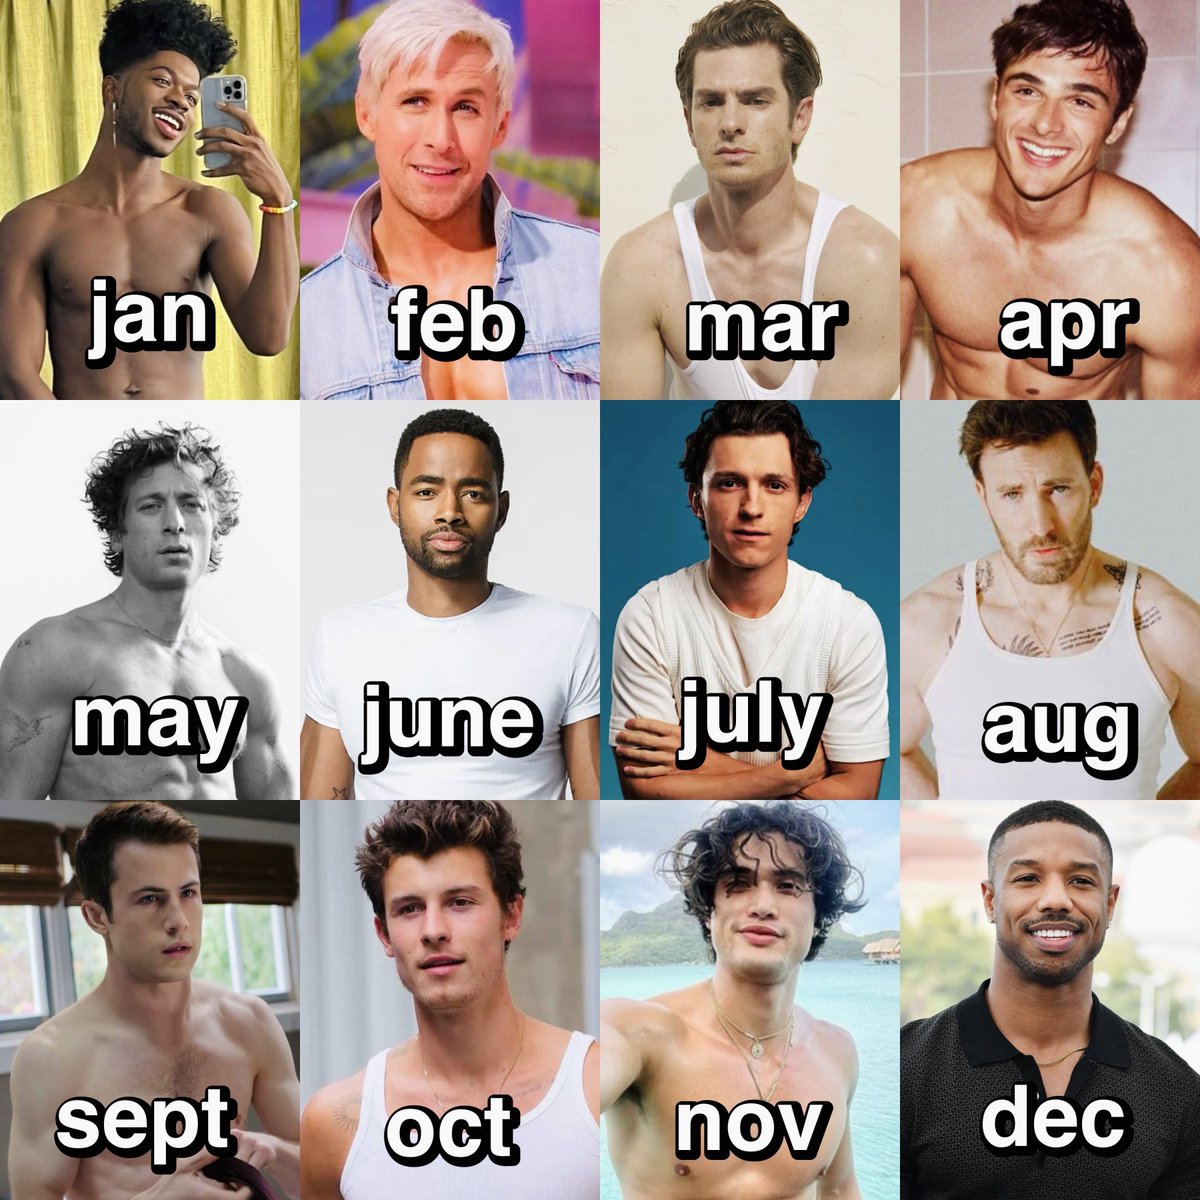 fuck, marry, or ignore the man in your birth month😭